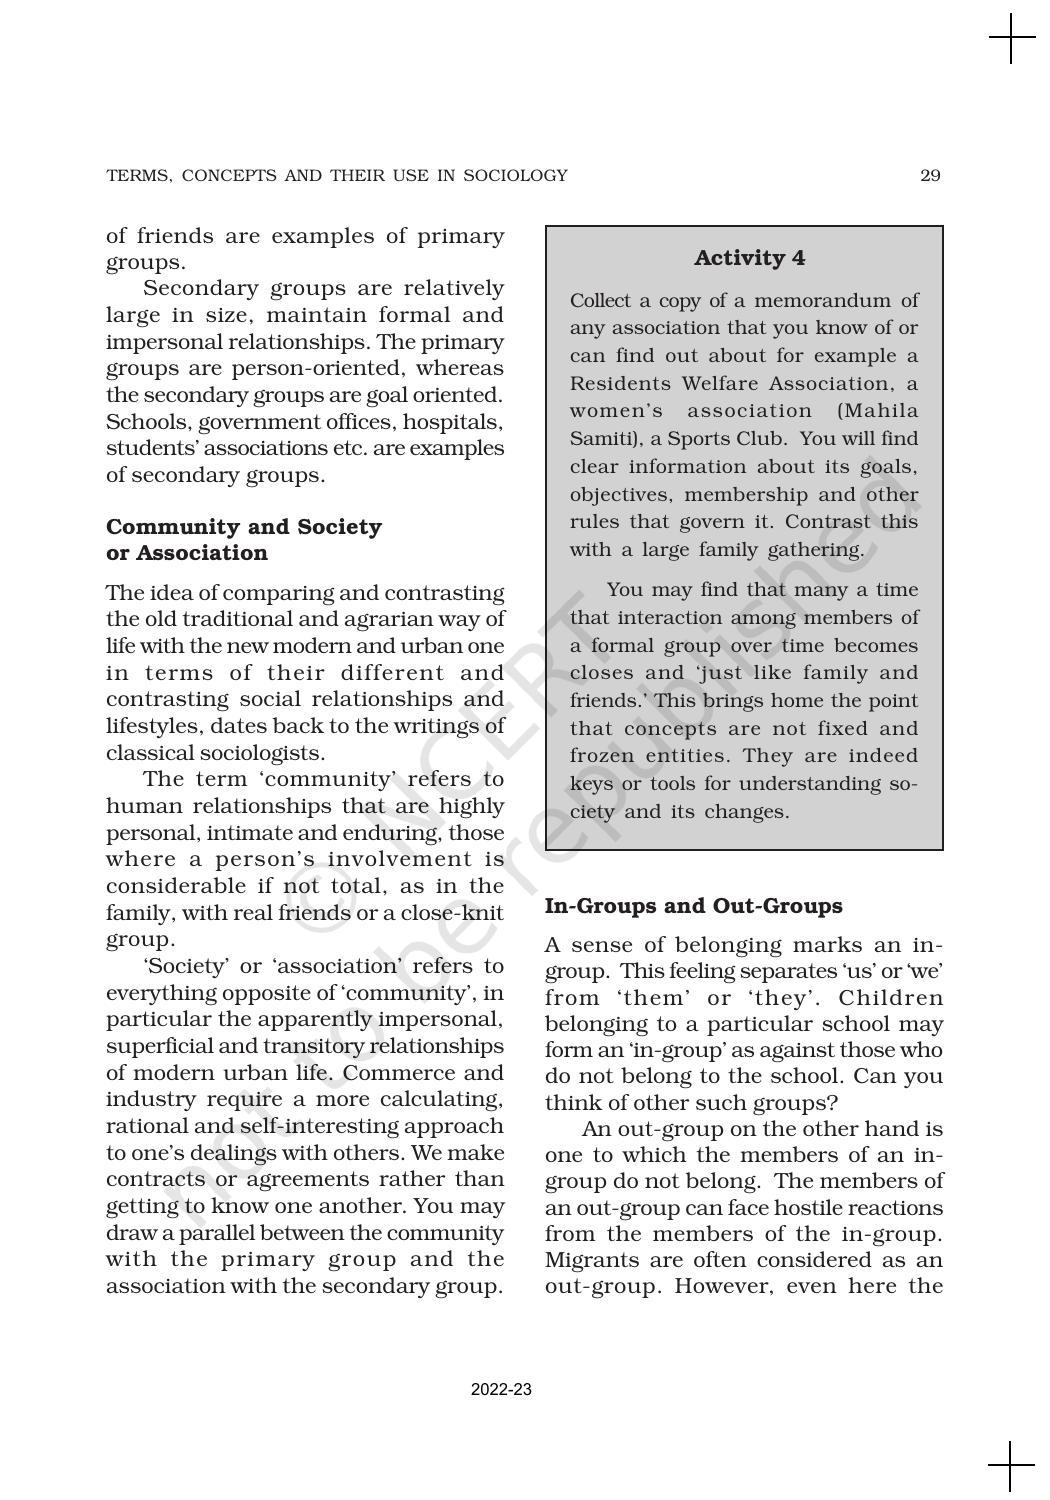 NCERT Book for Class 11 Sociology (Part-I) Chapter 2 Terms, Concepts and Their Use in Sociology - Page 6